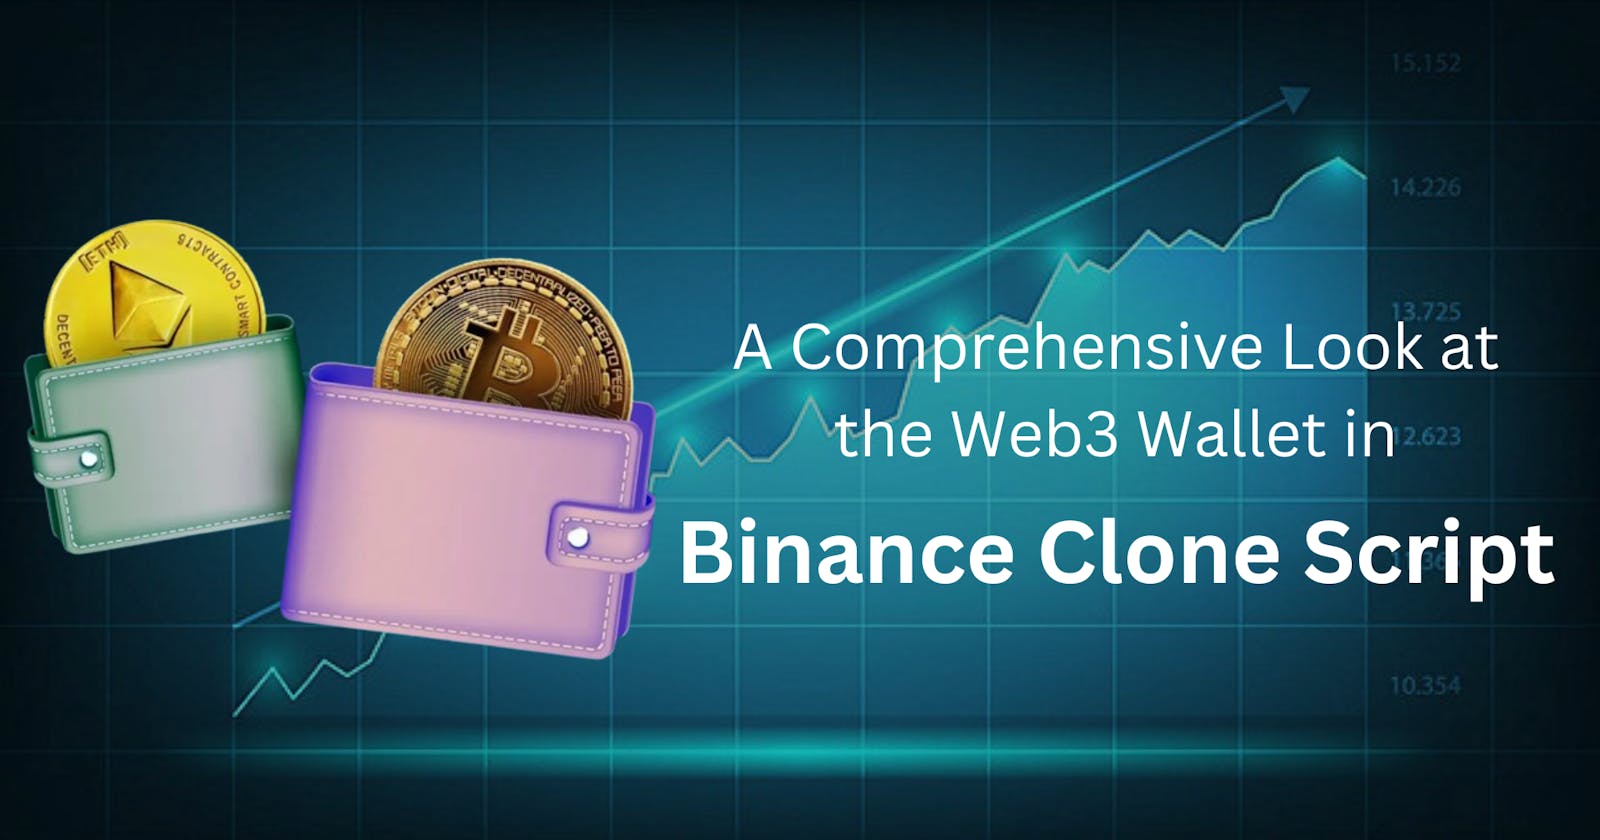 A Comprehensive Look at the Web3 Wallet in Binance Clone Script